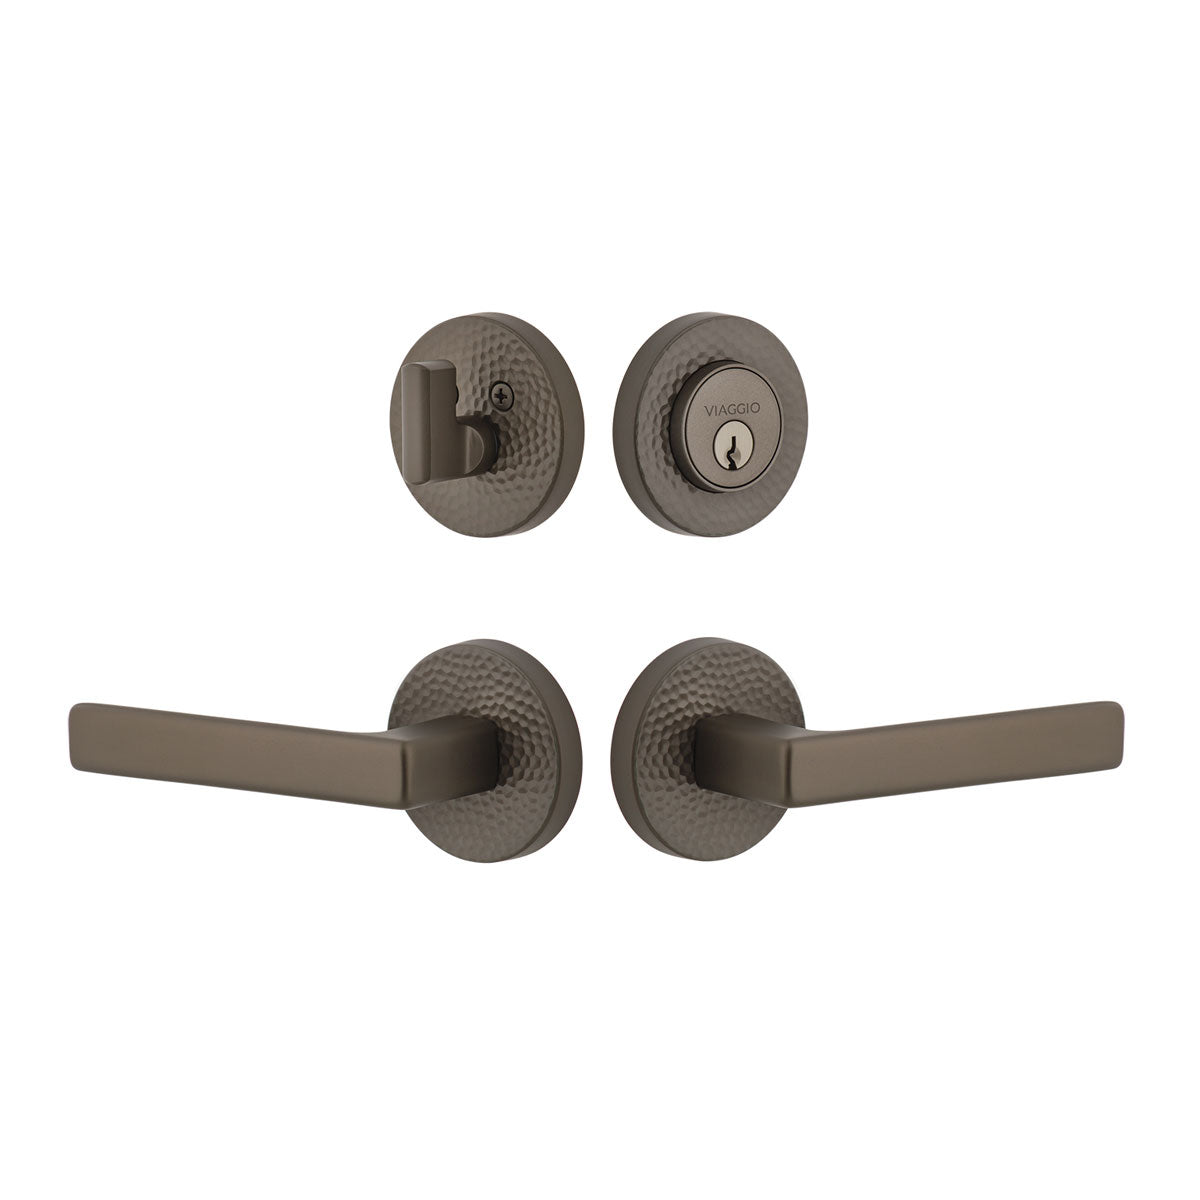 Circolo Hammered Rosette Entry Set with Lusso Lever in Titanium Gray